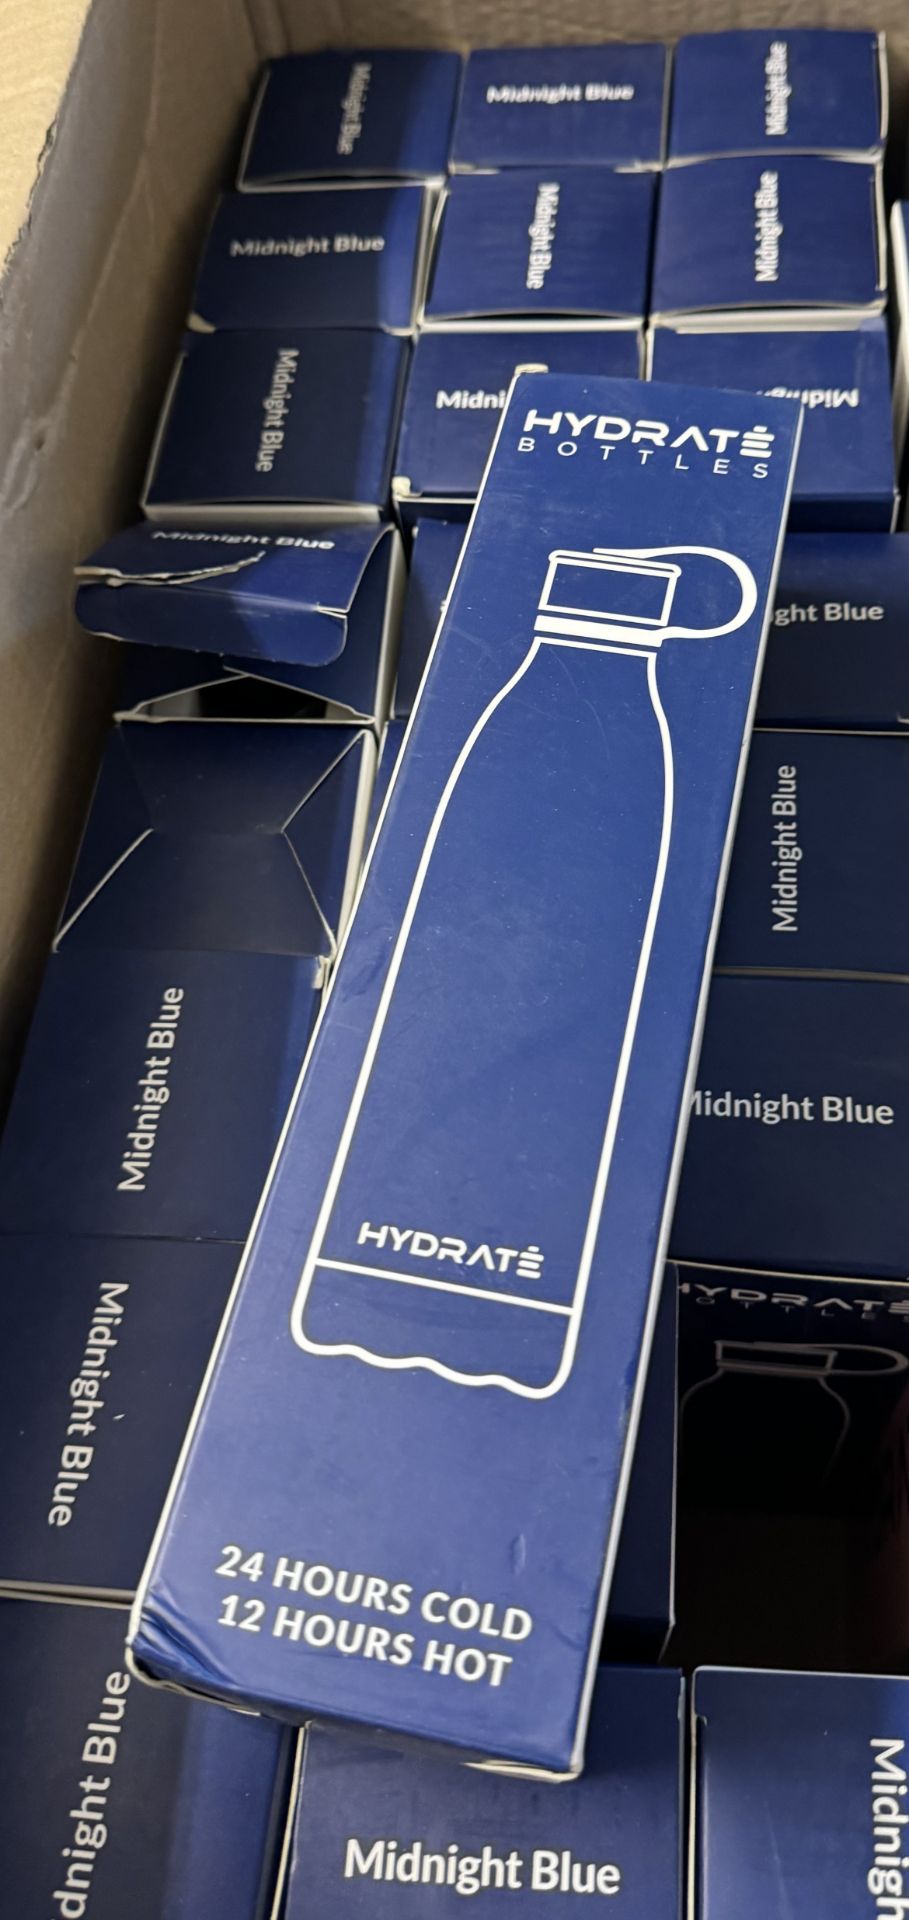 5 x HYDRATE Super Insulated Stainless Steel Water Bottles in Midnight Blue - 500ml - (NEW) - RRP Â£7